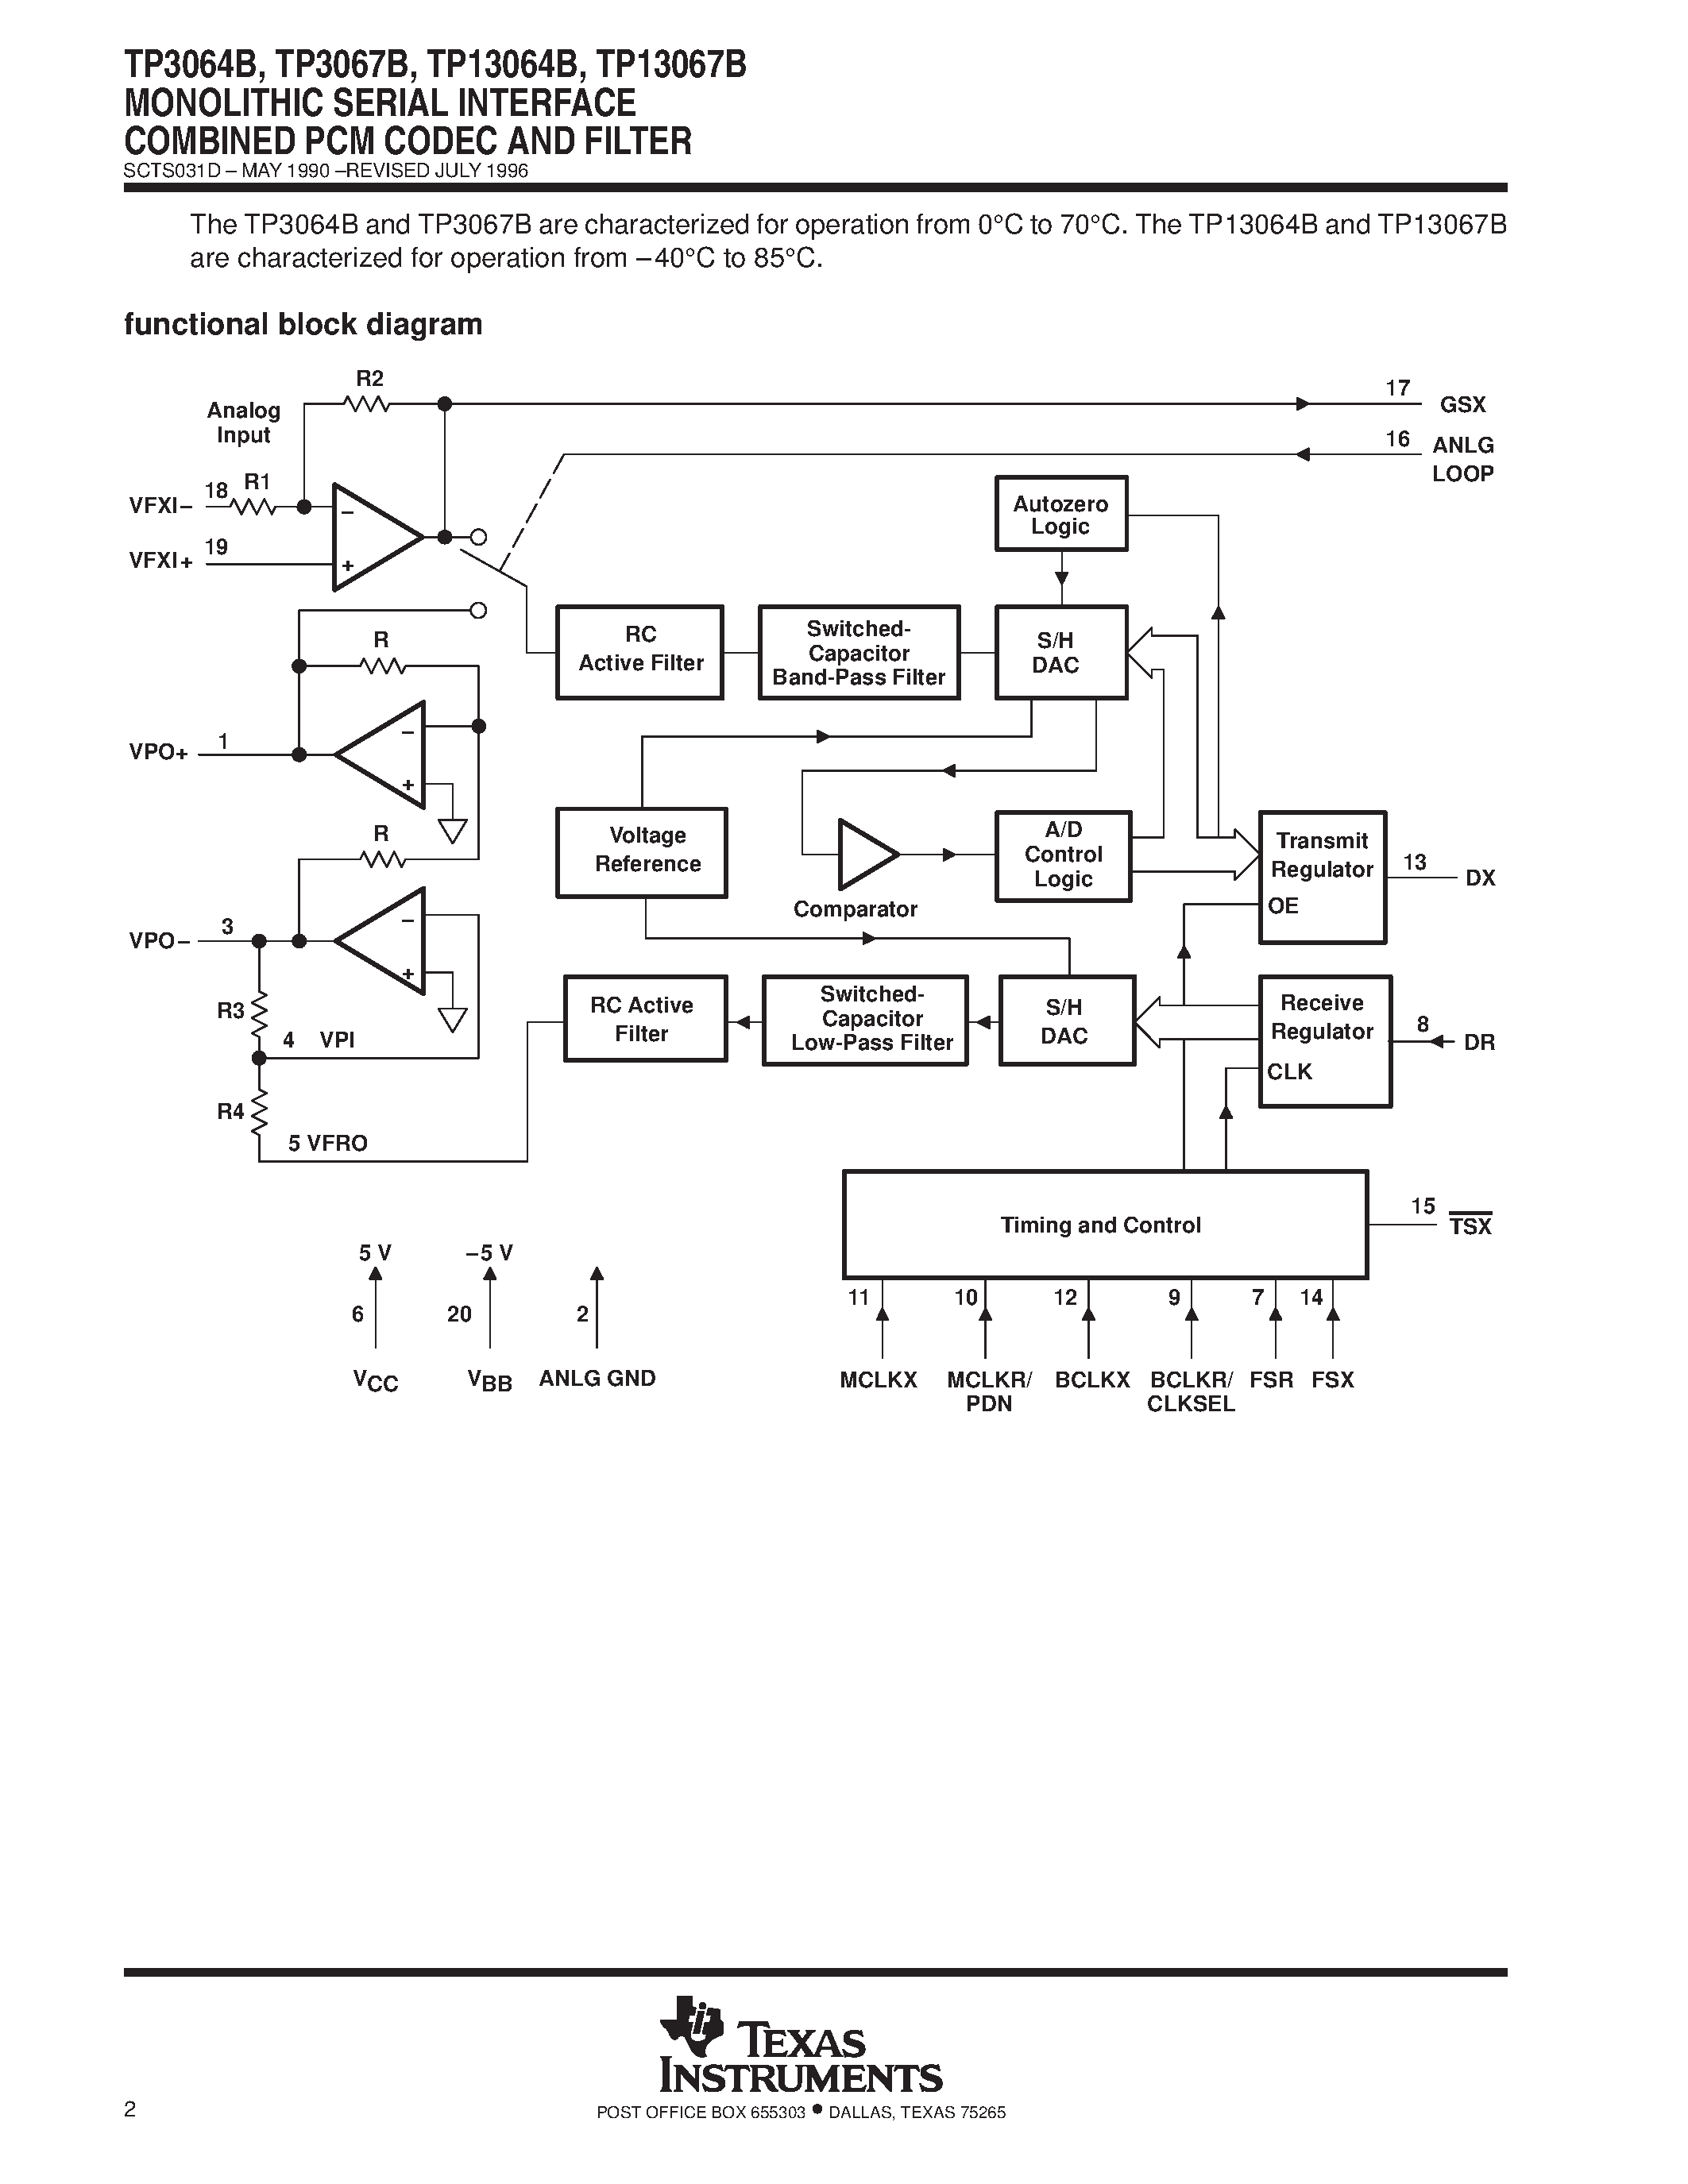 Datasheet TP13064BN - MONOLITHIC SERIAL INTERFACE COMBINED PCM CODEC AND FILTER page 2